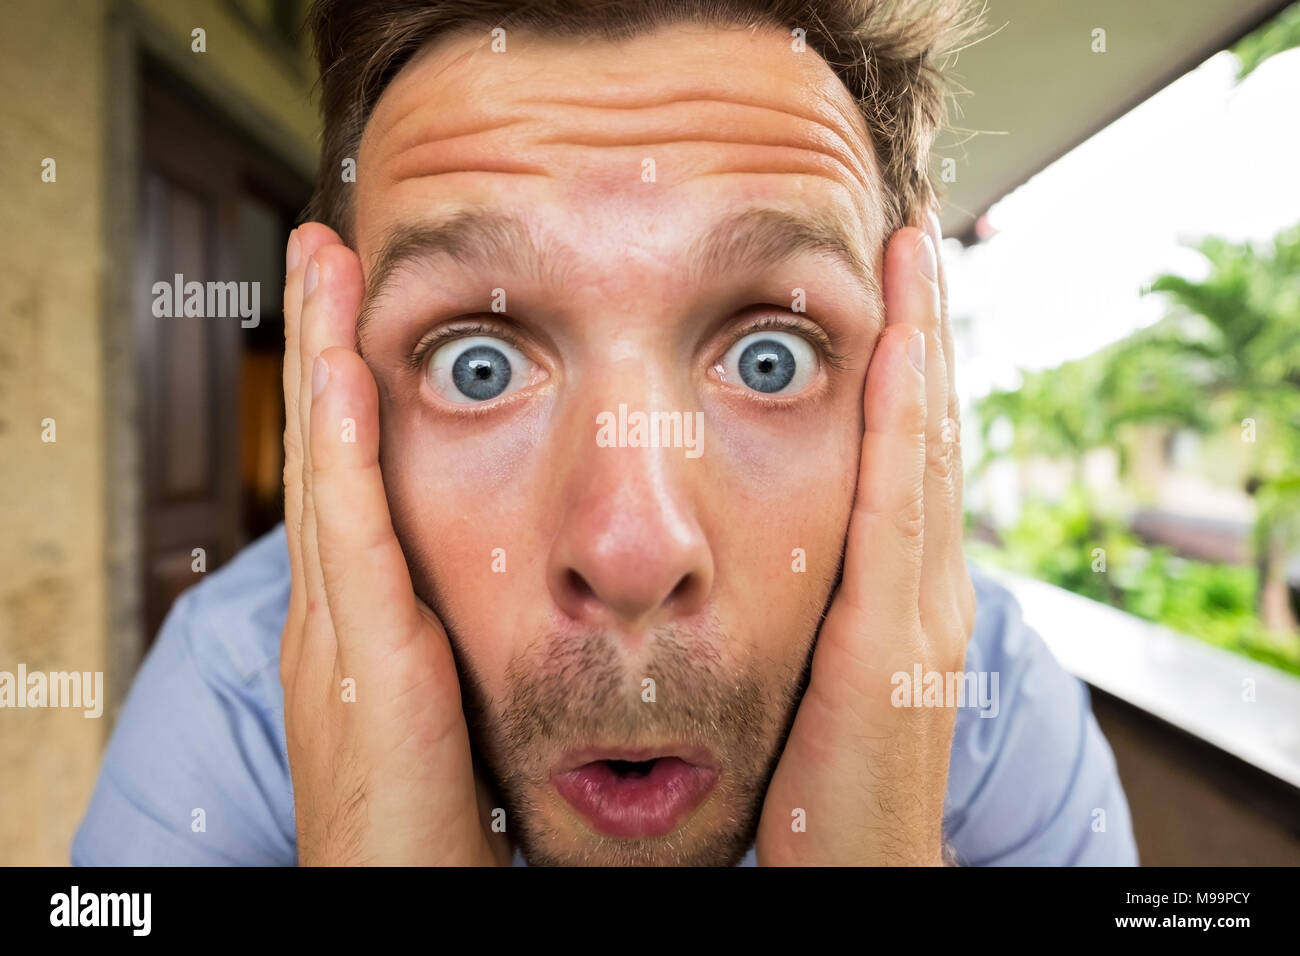 Panic man is shocked. His face is close to camera. He is opening his mouth in surprise Stock Photo